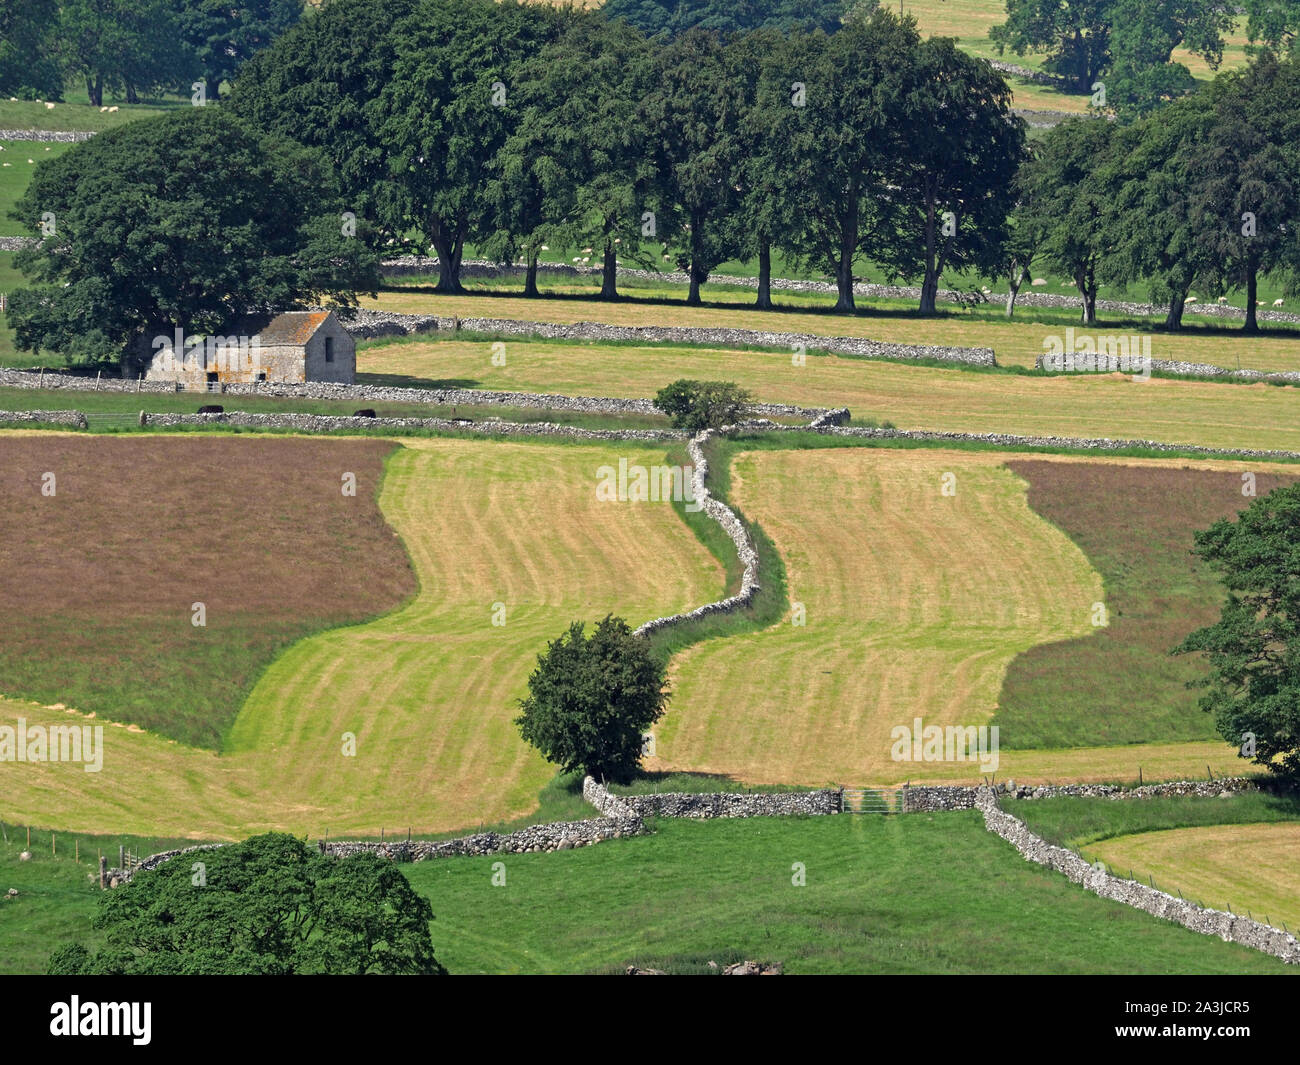 wavy patchwork pattern of partially mown hillside fields divided by wiggly dry stone wall with barn and line of trees in background Cumbria,England,UK Stock Photo